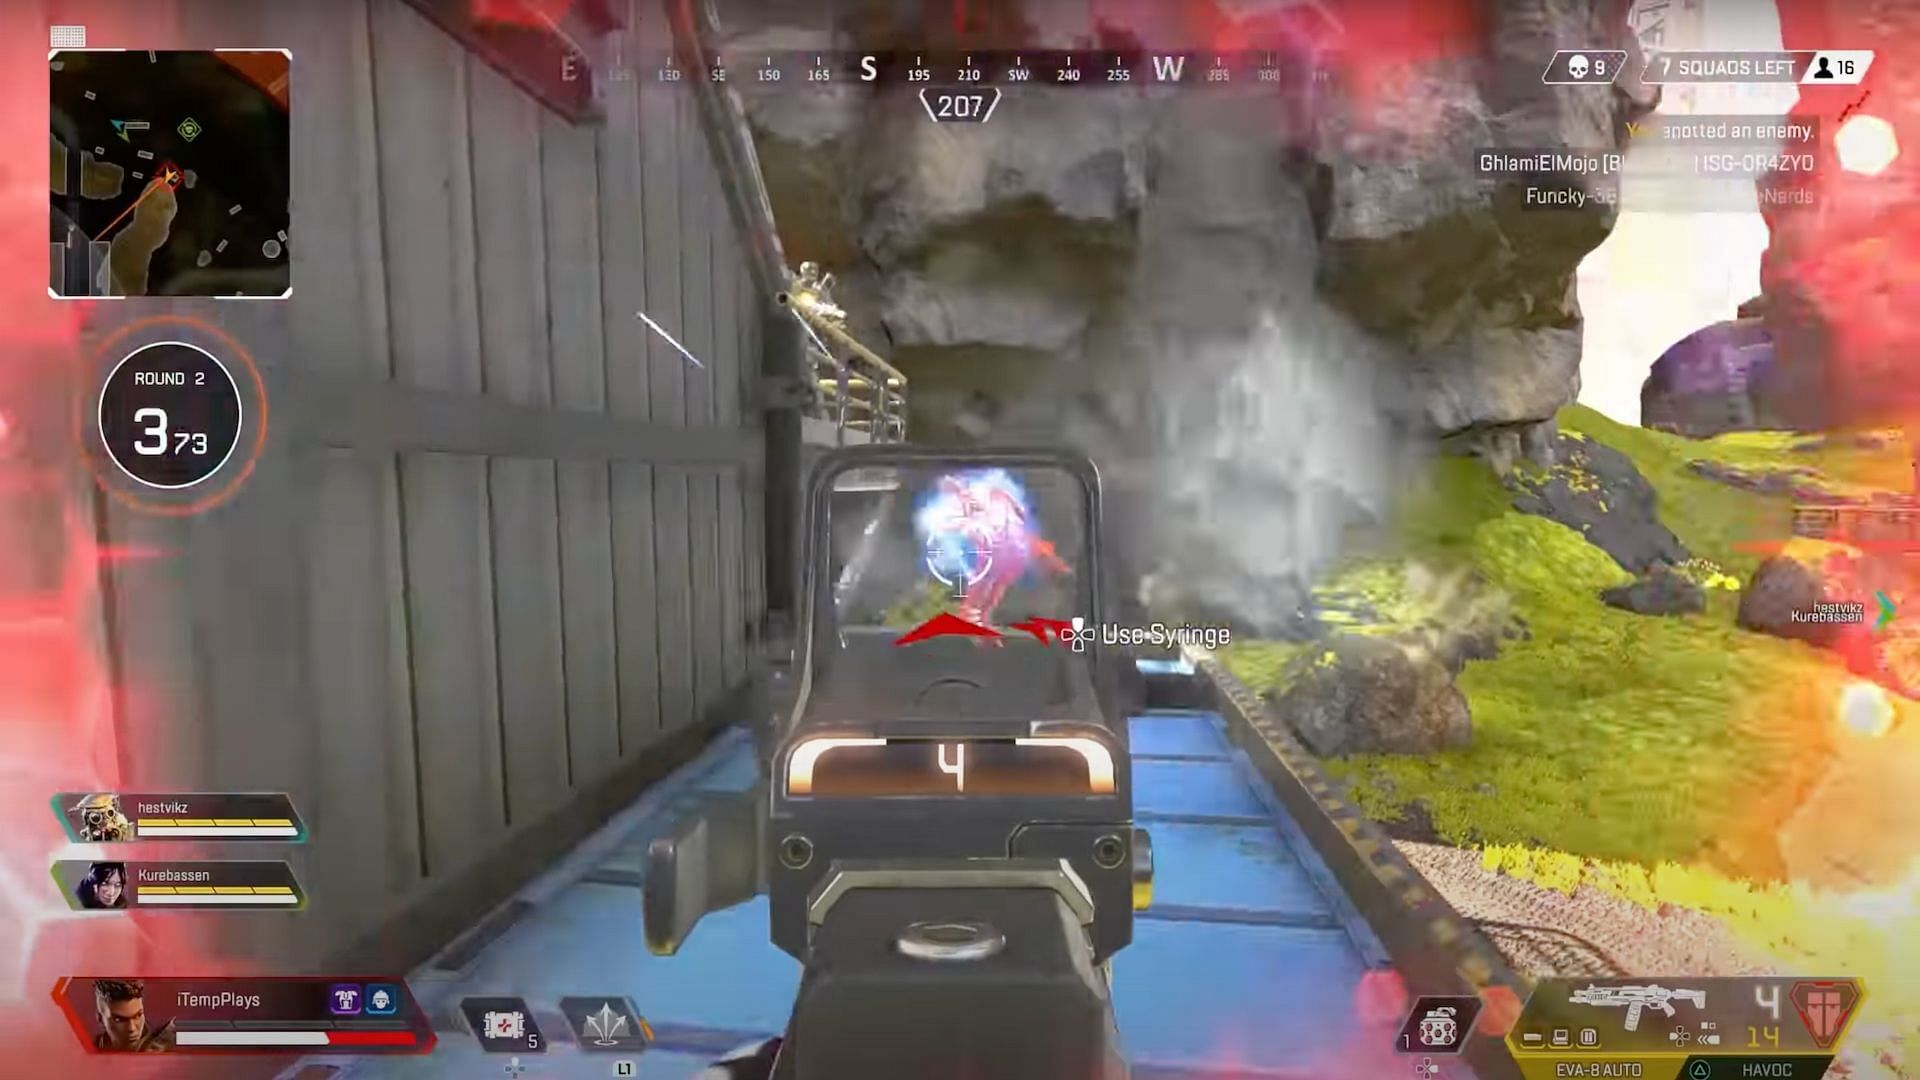 Players are able to find many strong Gold weapons in Apex Legends (Image via iTemp Plays/YouTube)